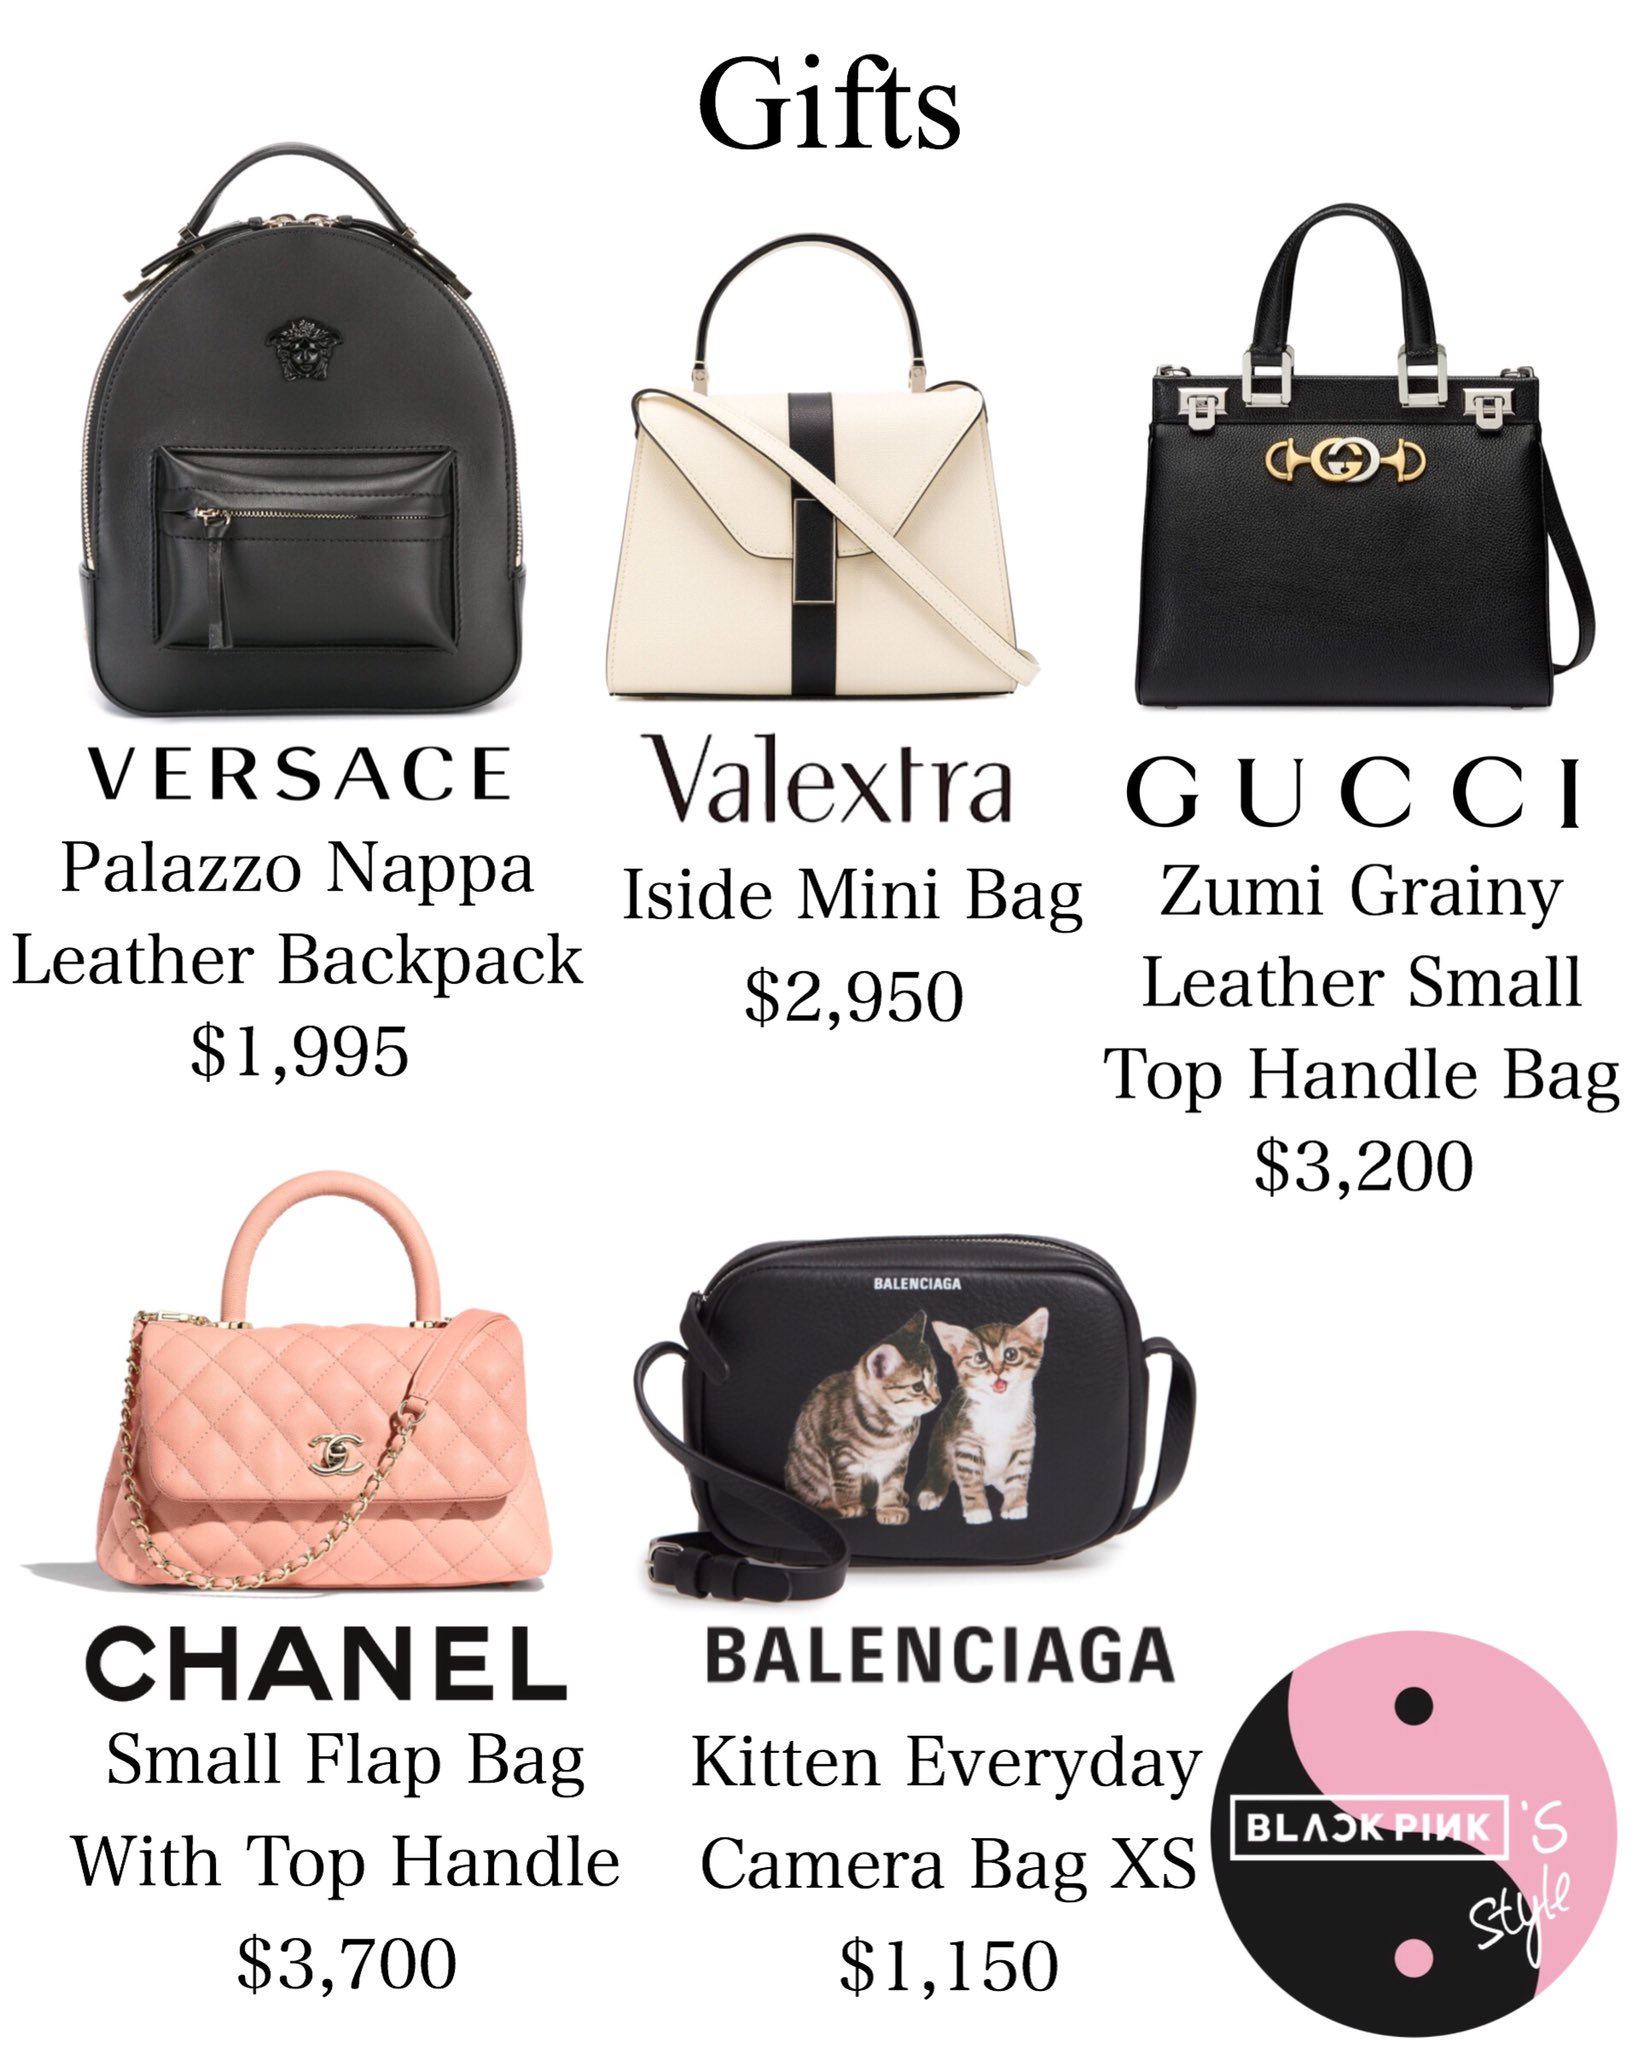 BLACKPINK's Lisa's Handbag Collection Is Massive And The Prices